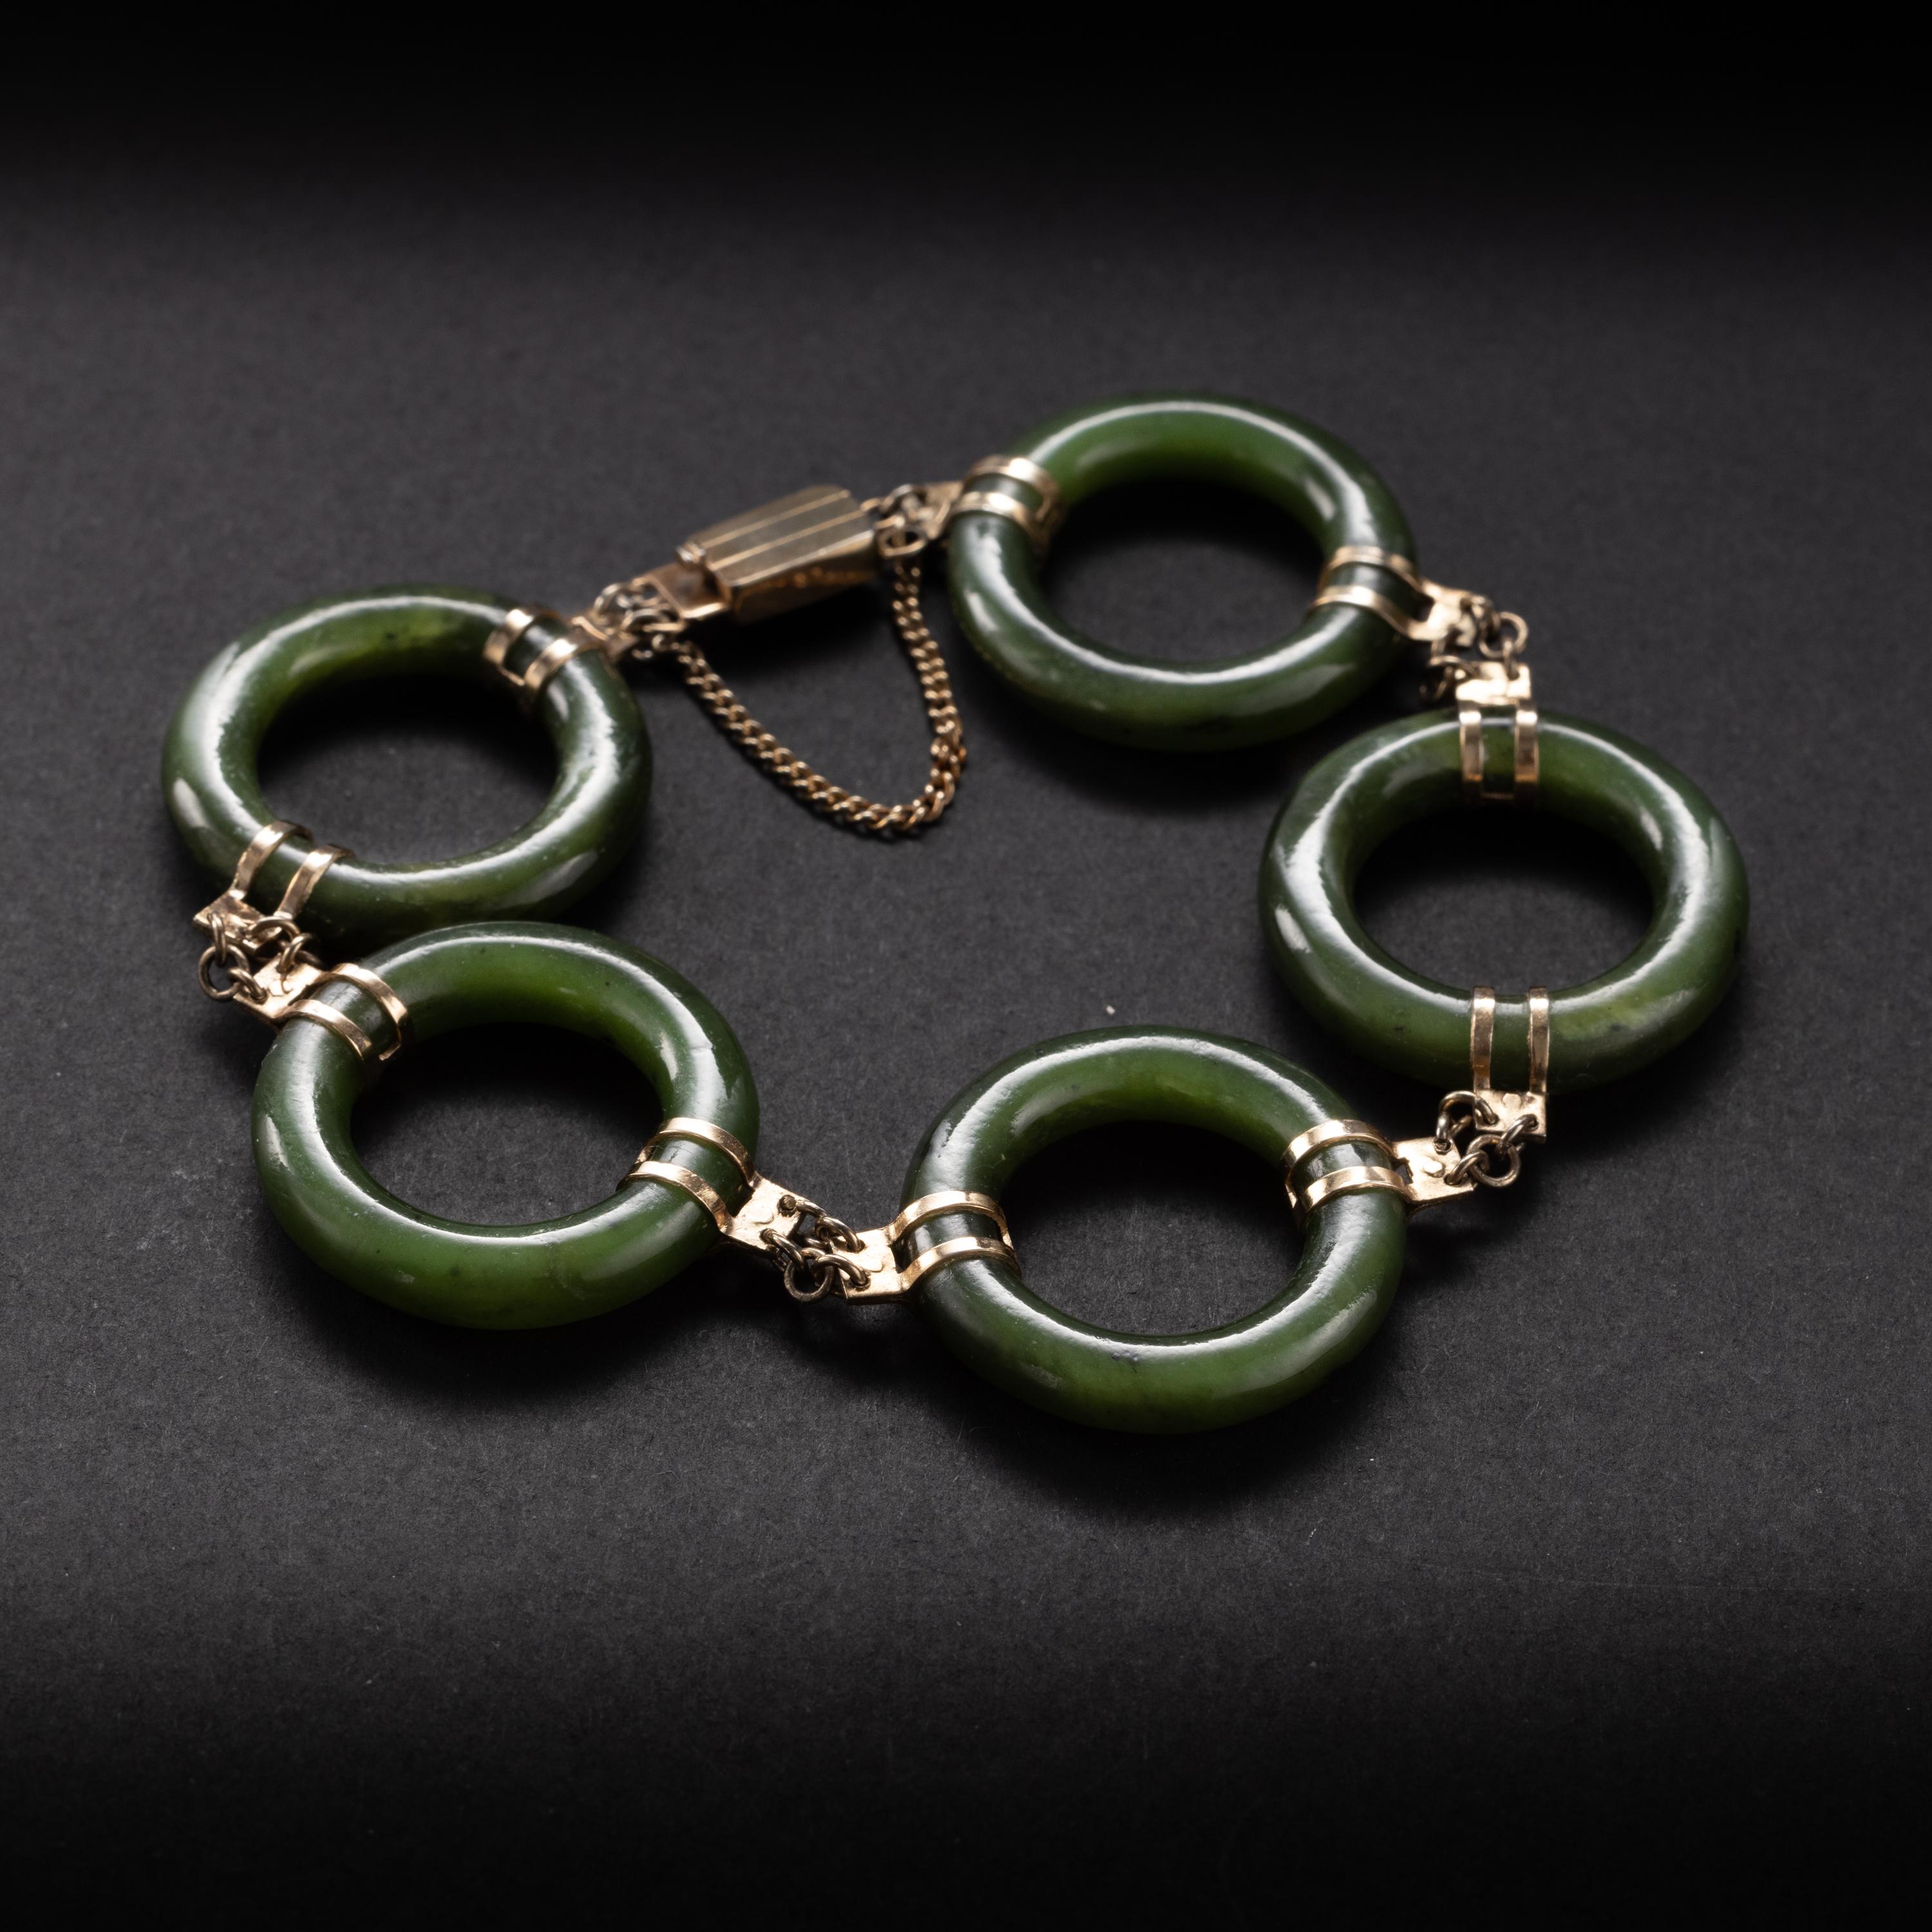 Mod, modern, and magnificent! This gorgeous midcentury (circa 1970s-1970s) bracelet is composed of 5 hand-carved Chinese nephrite hoops. This is highly translucent nephrite; what locals call 